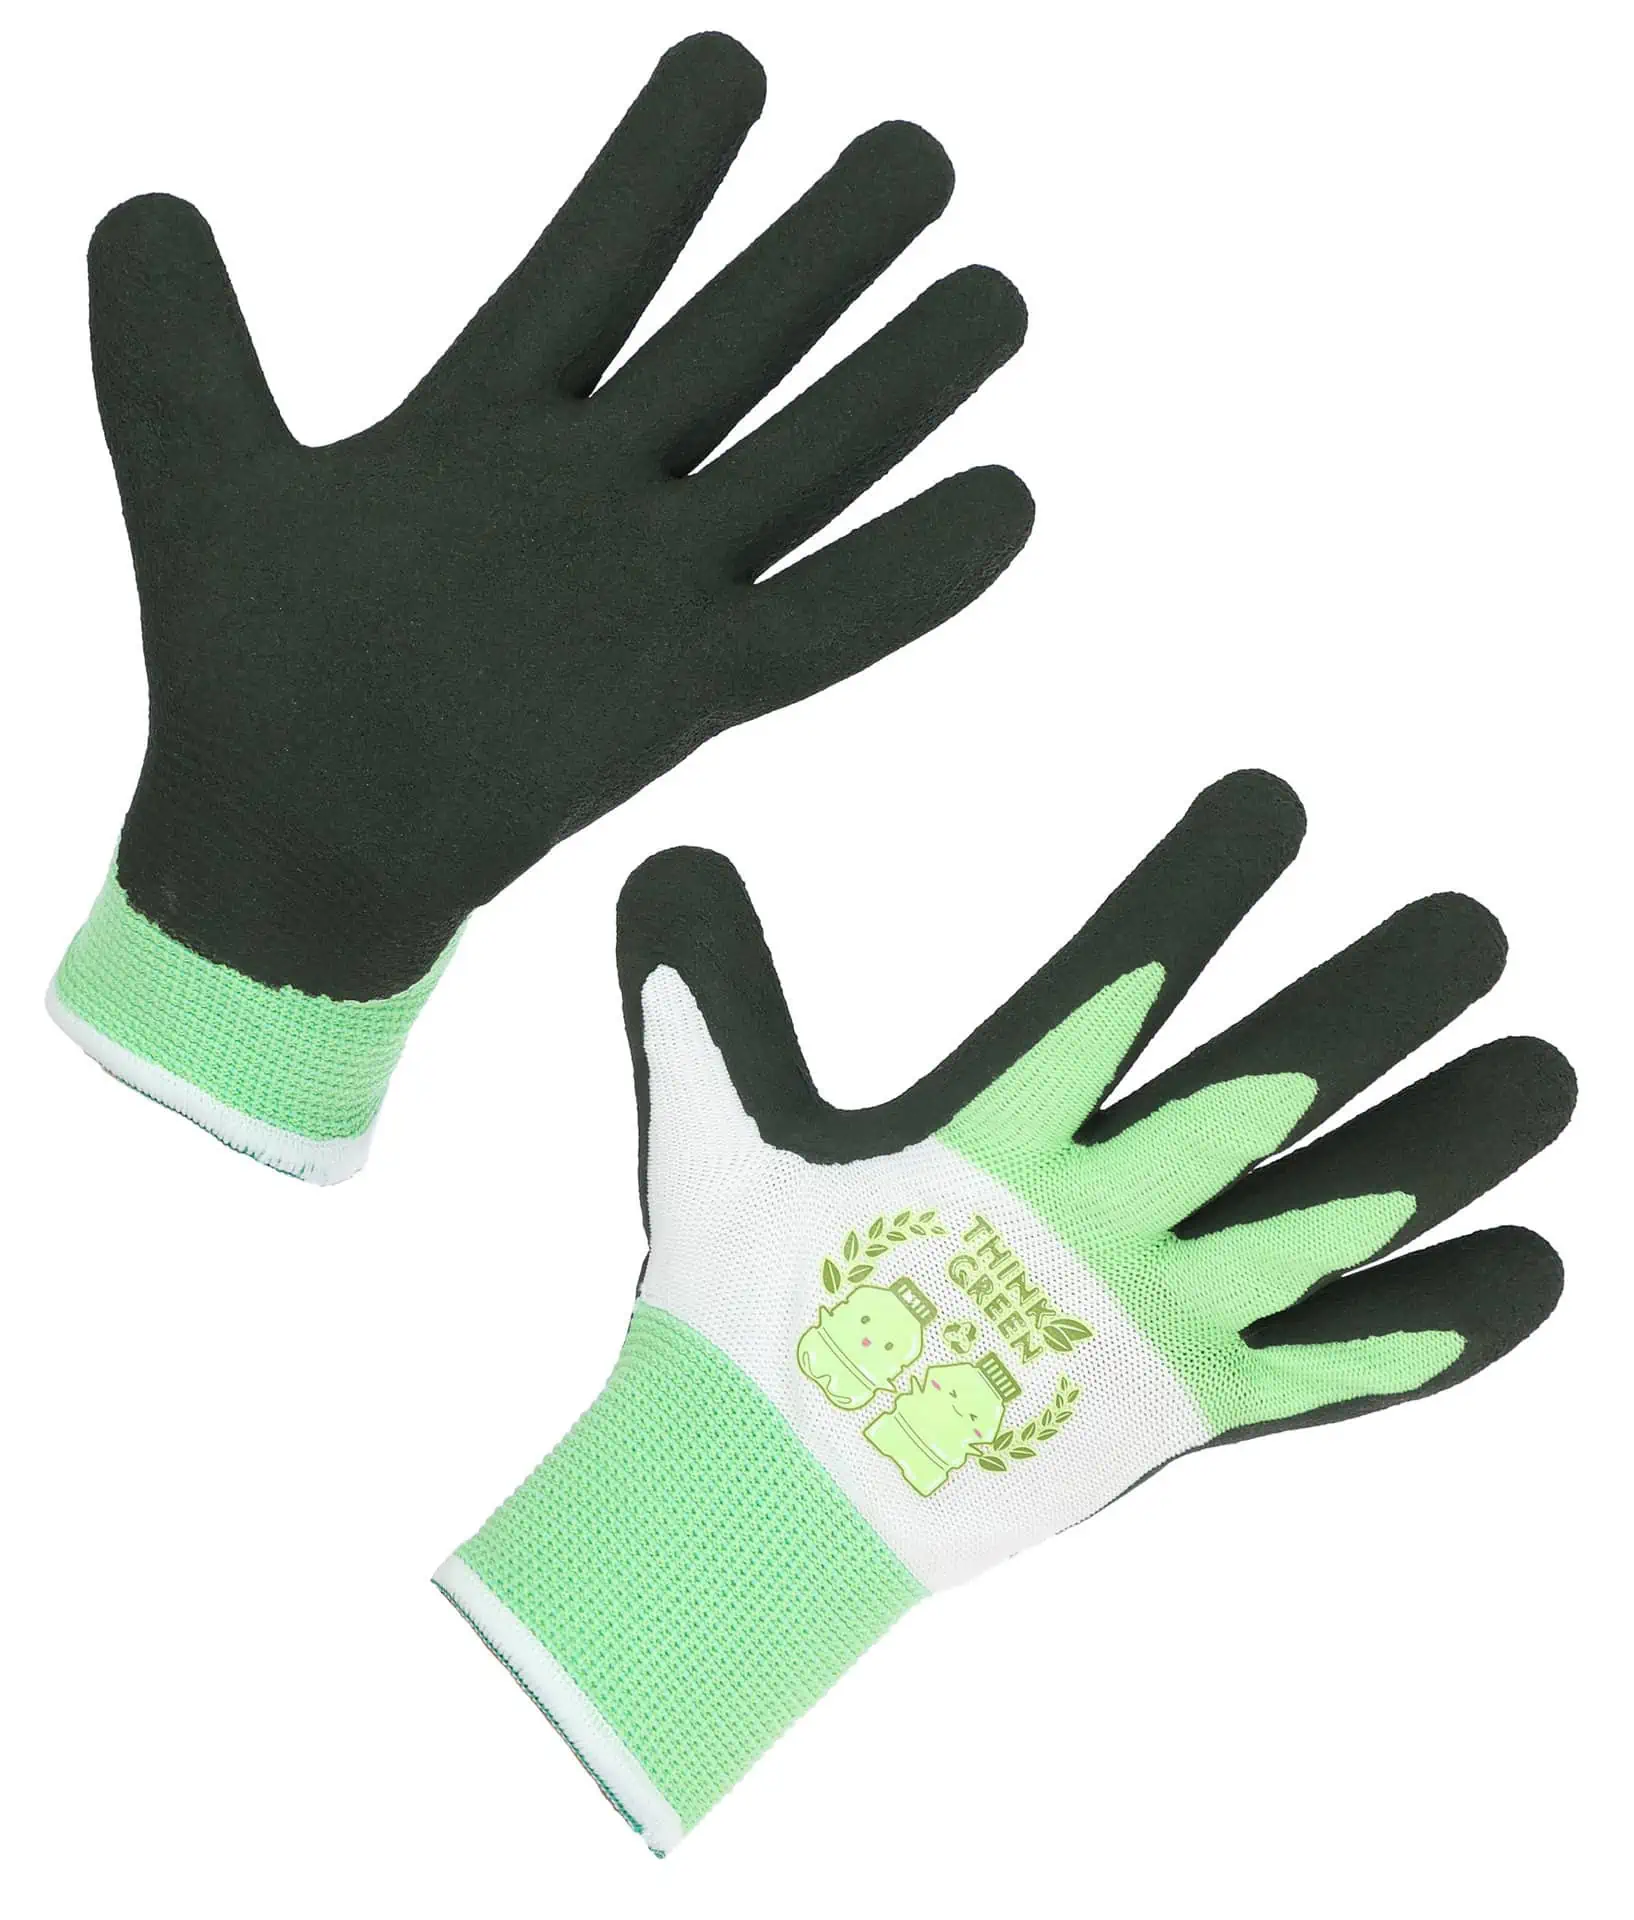 Kids’ Glove THINKGREEN Sprout Age 3-5, Latex Coated